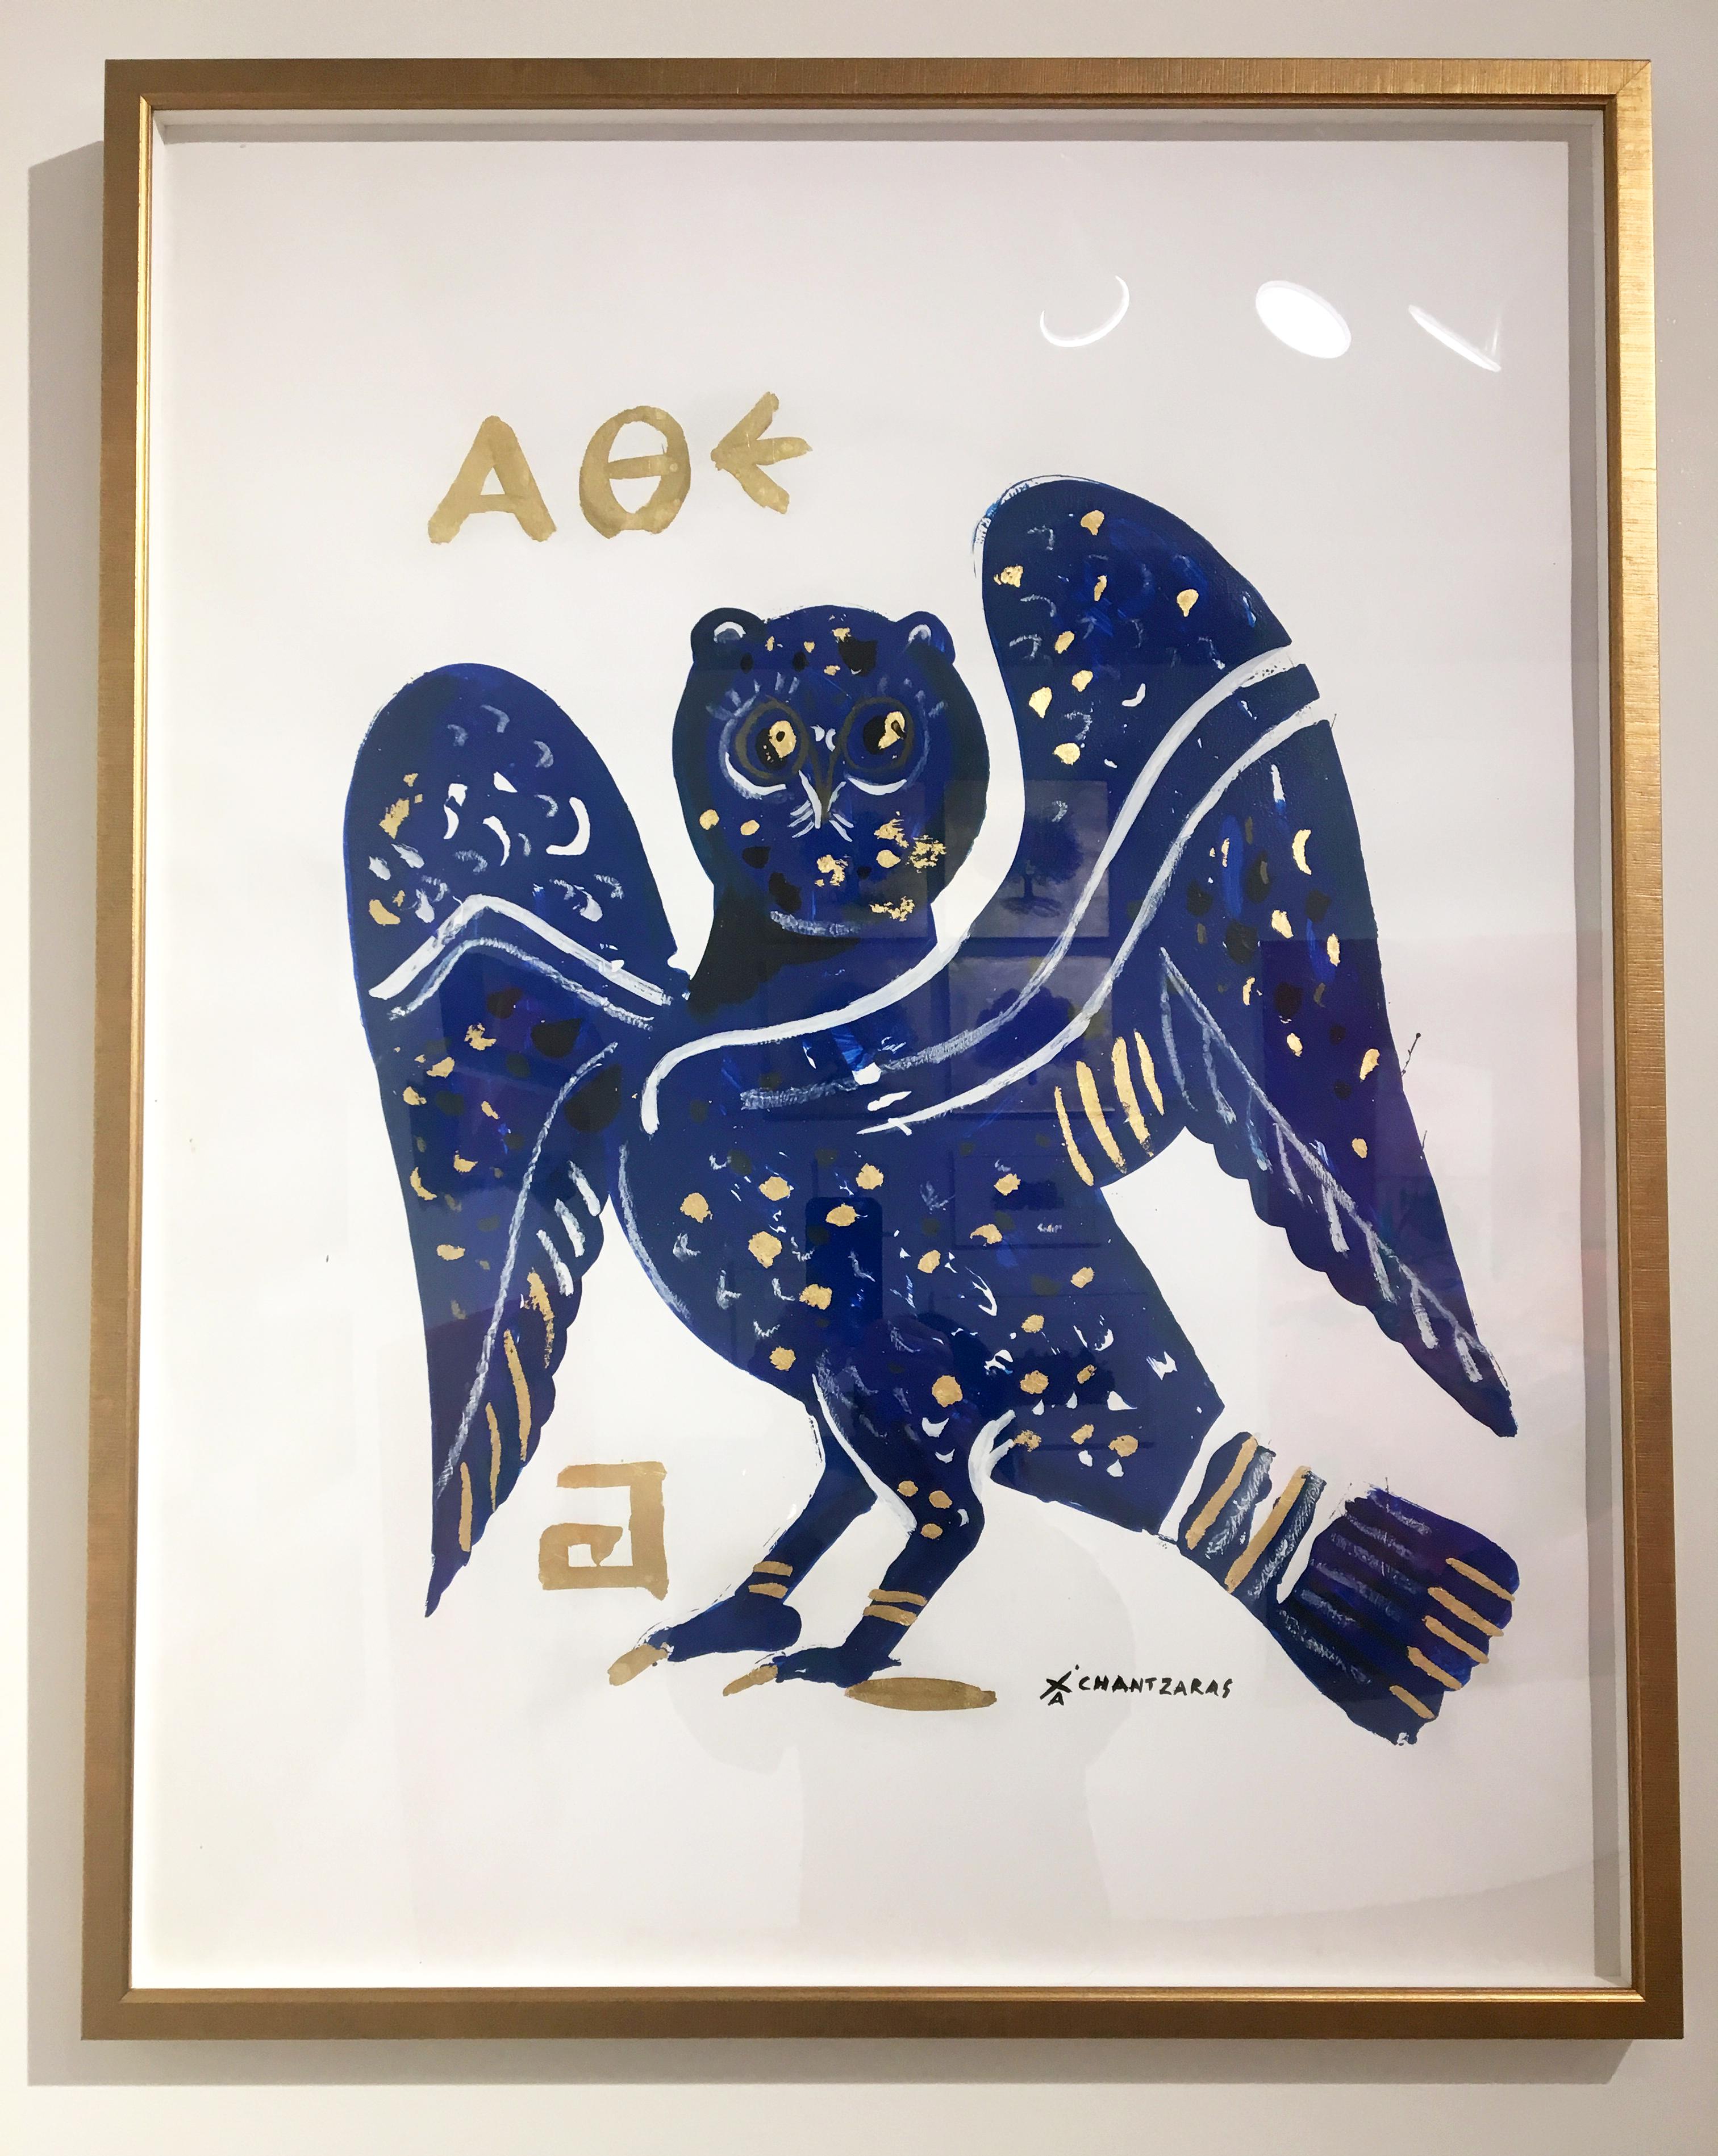 Apostolos Chantzaras Figurative Painting - Cleopatra Owl III, oil paint on paper, gold and blue contemporary golden frame